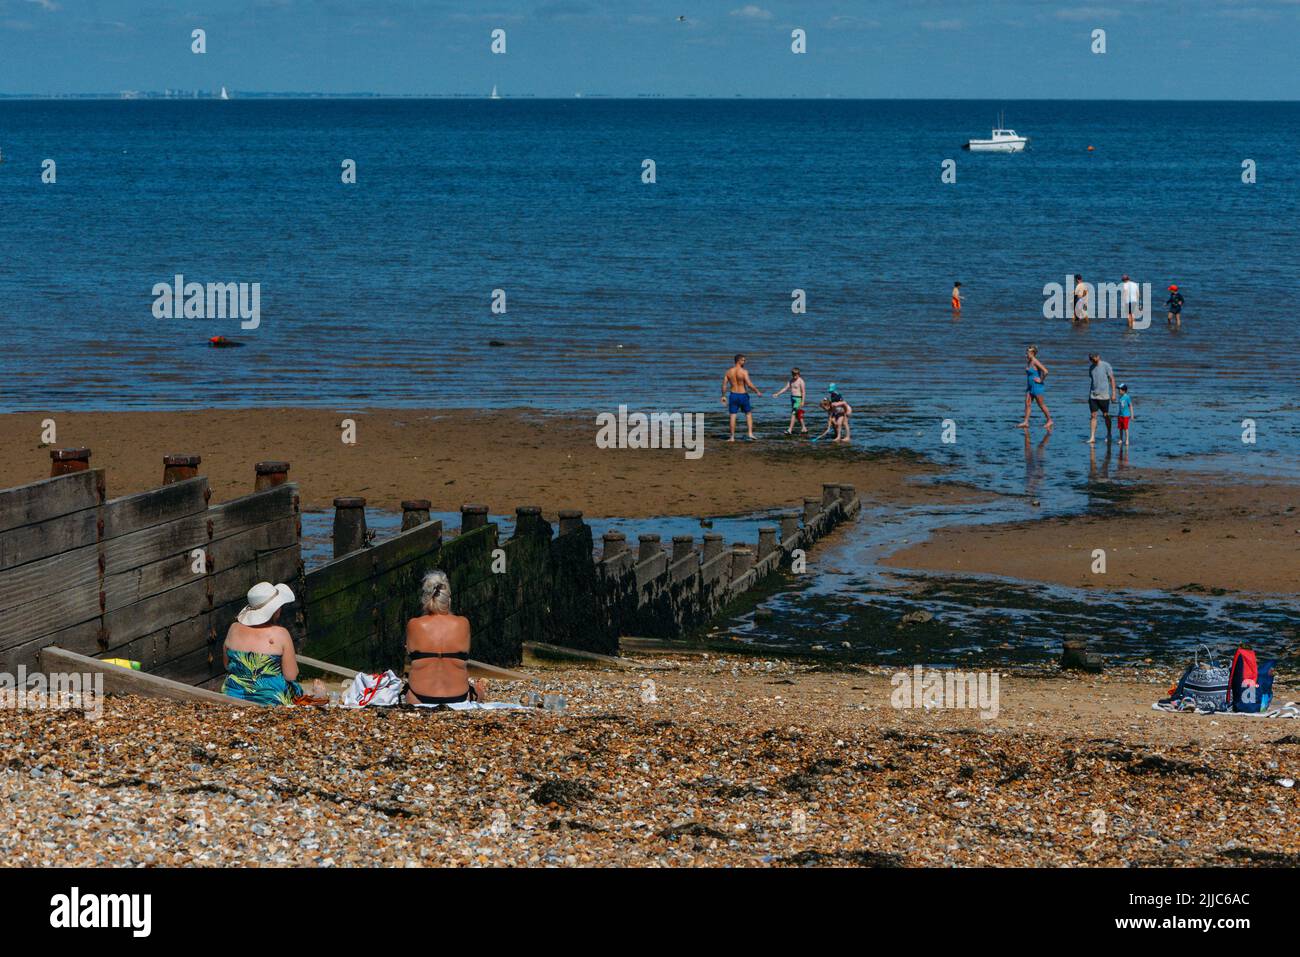 Whitstable, UK - July 16, 2022: People relax on the beach in Whitstable, Kent, UK on a hot summer day Stock Photo